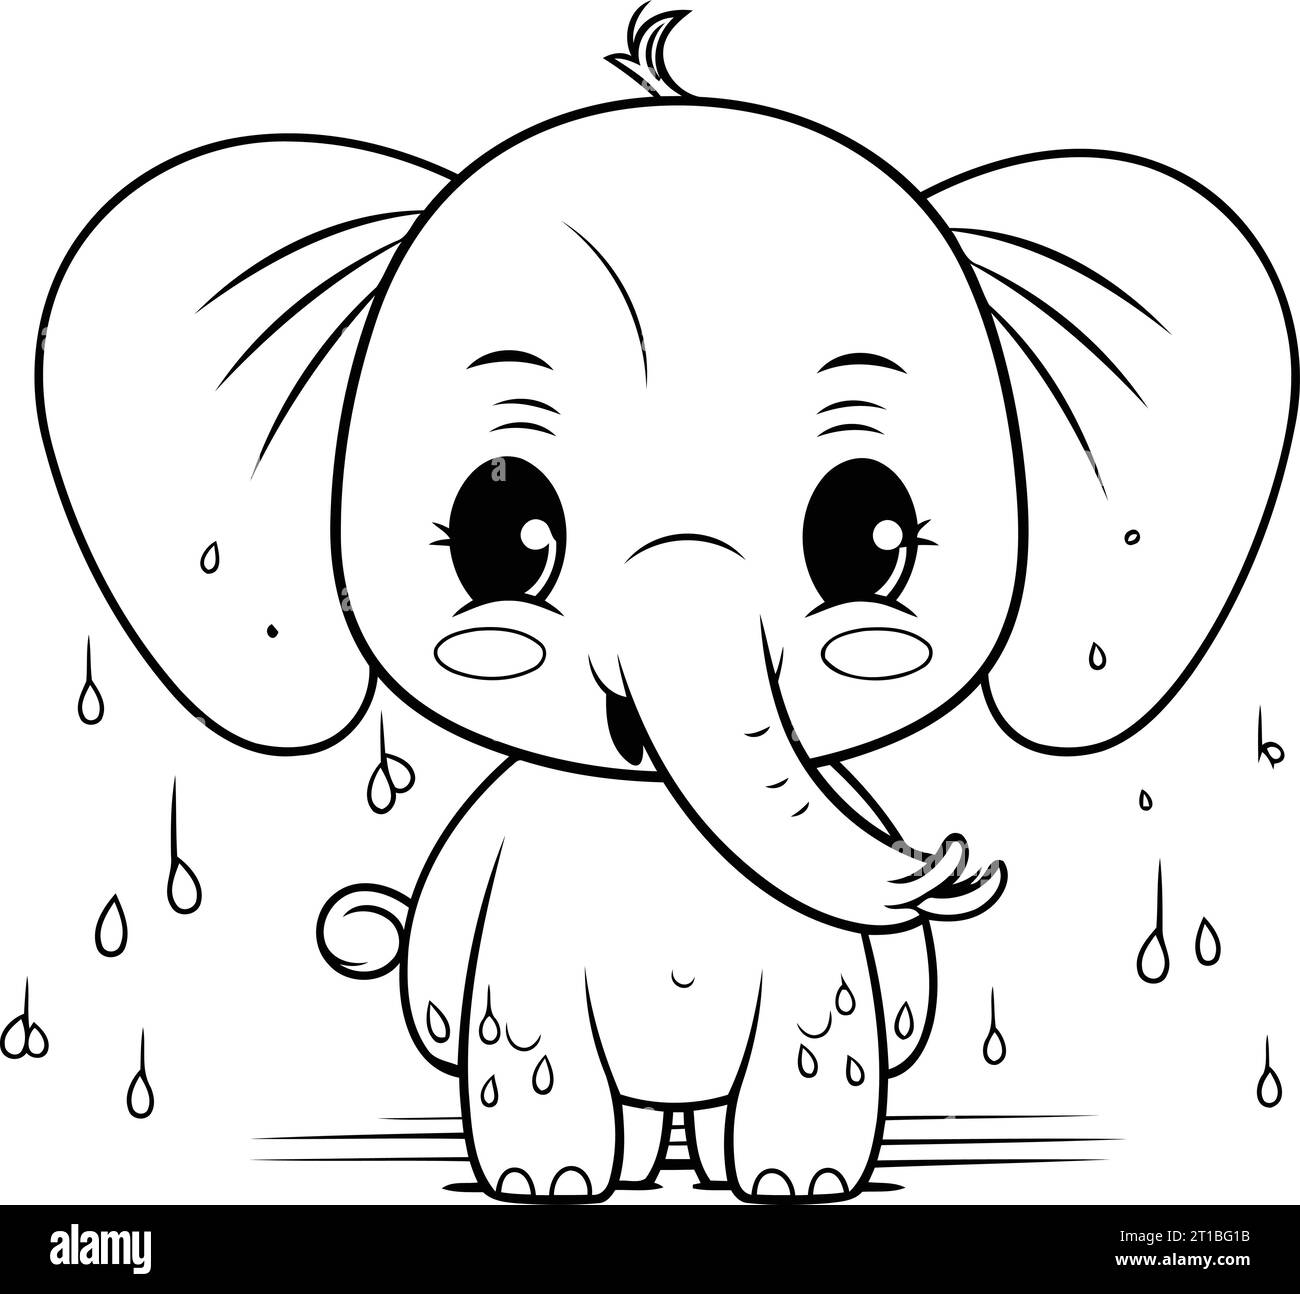 Cute cartoon elephant with raindrops. Vector illustration isolated on white background. Stock Vector